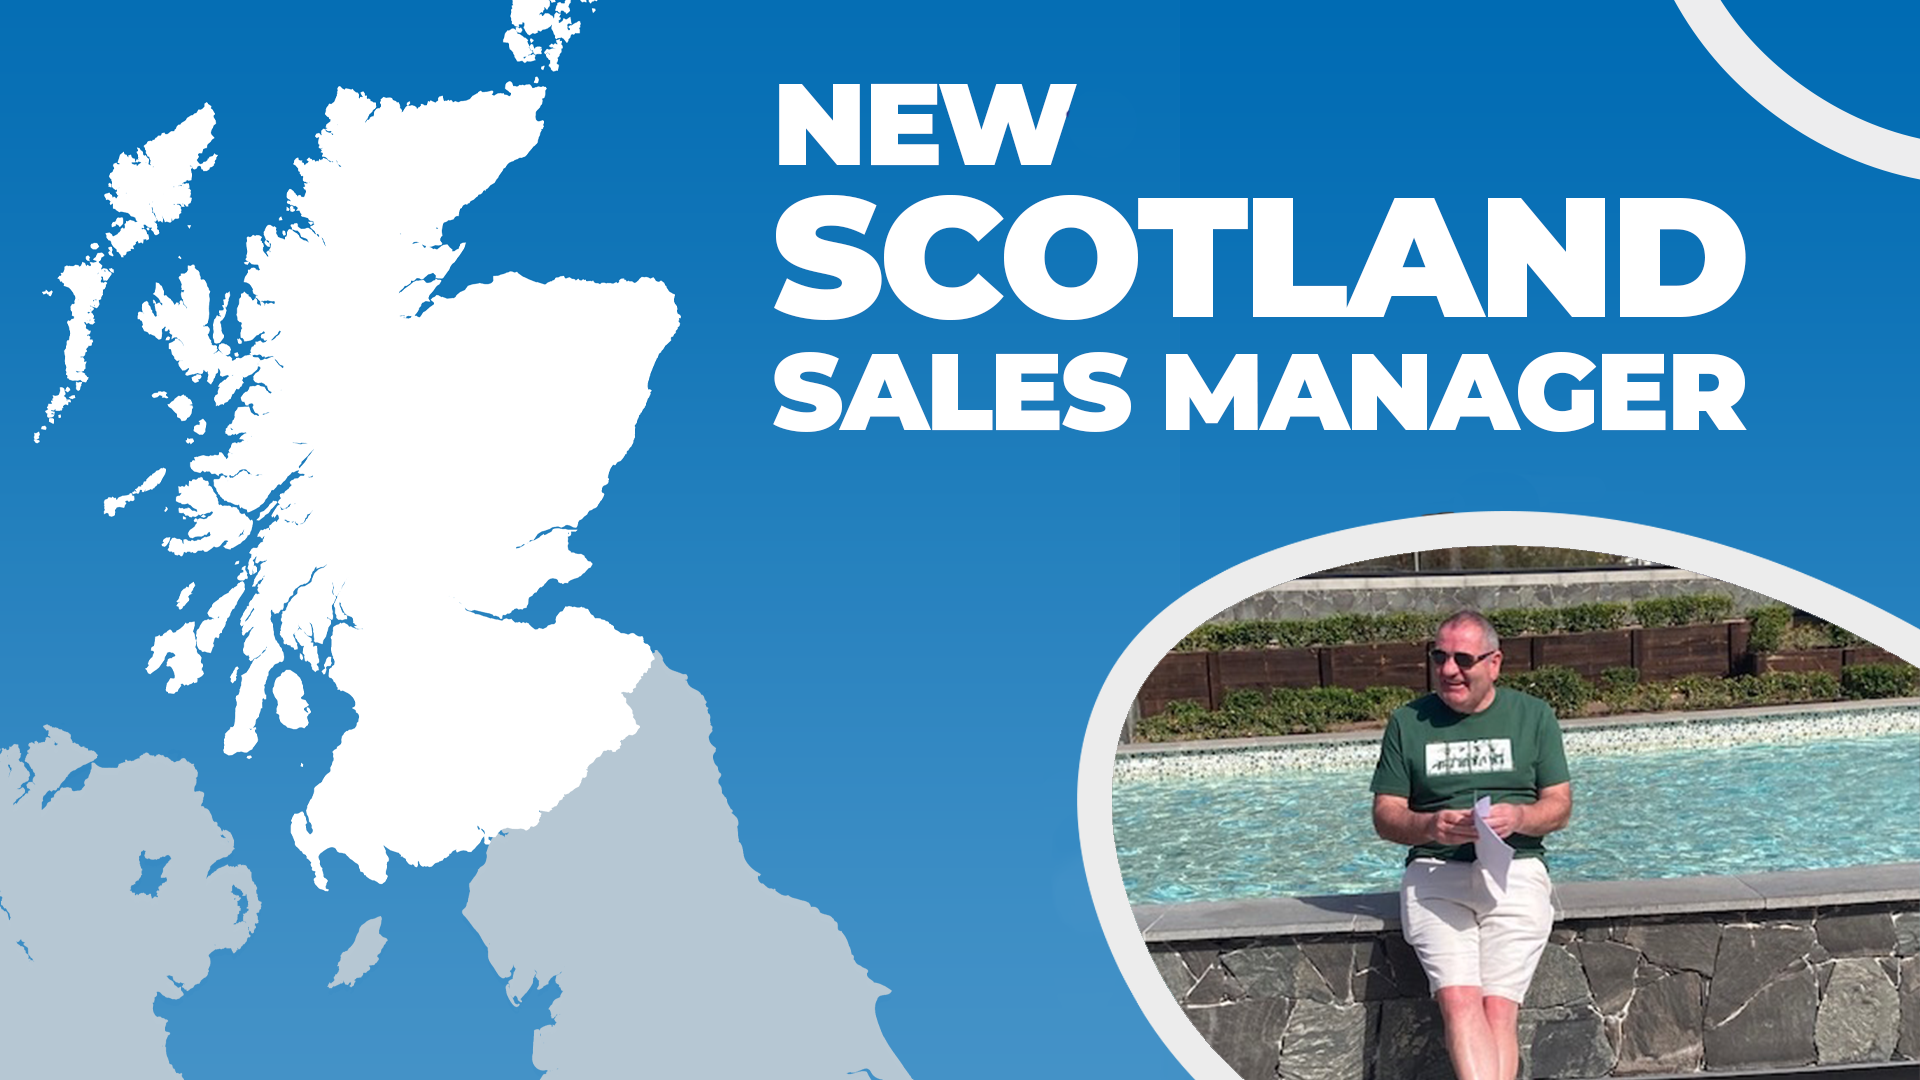 Meet David: The New Regional Sales Manager For Scotland